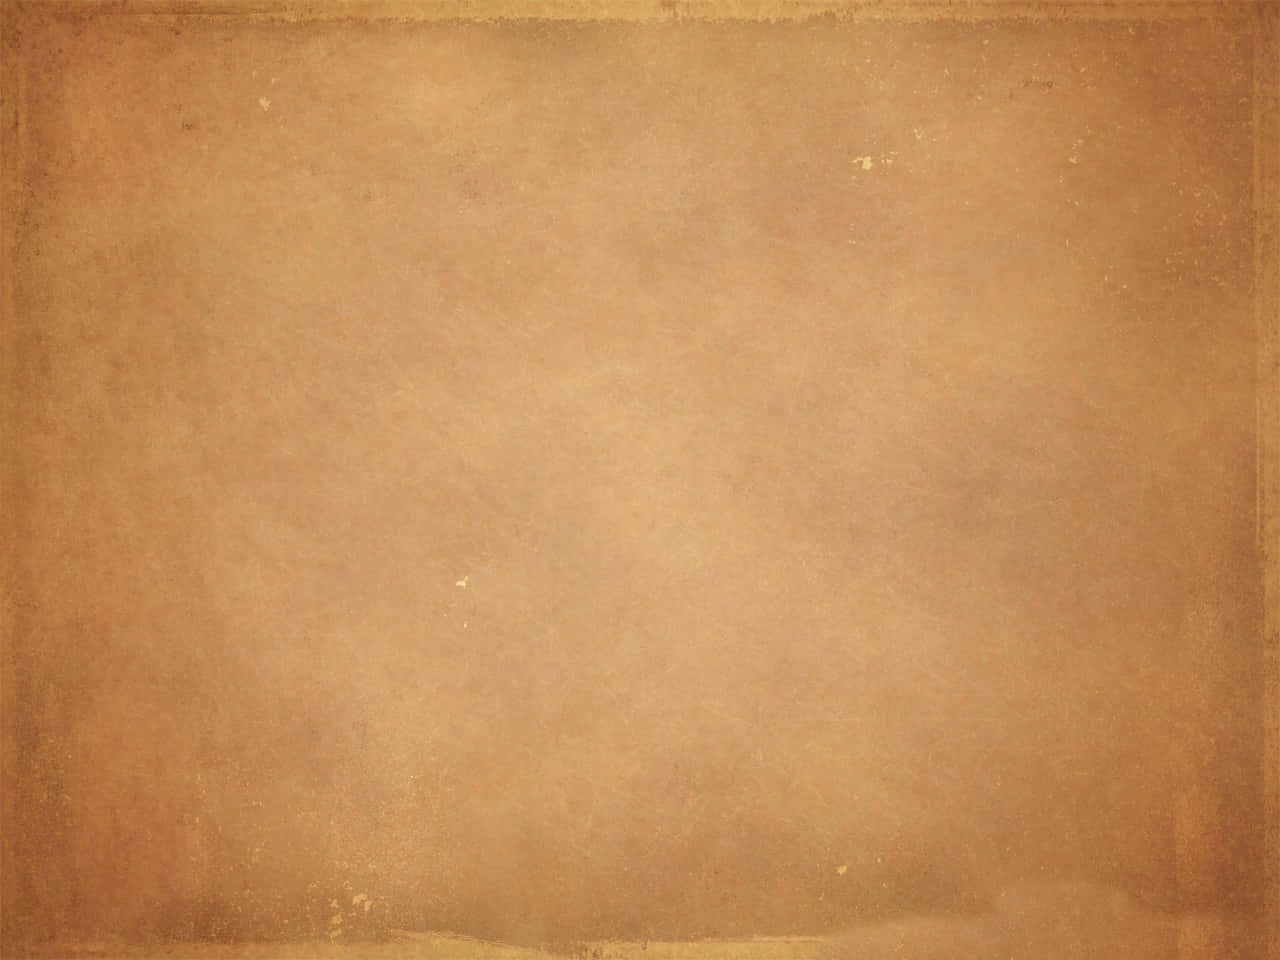 An Old Brown Paper Background With A Frame